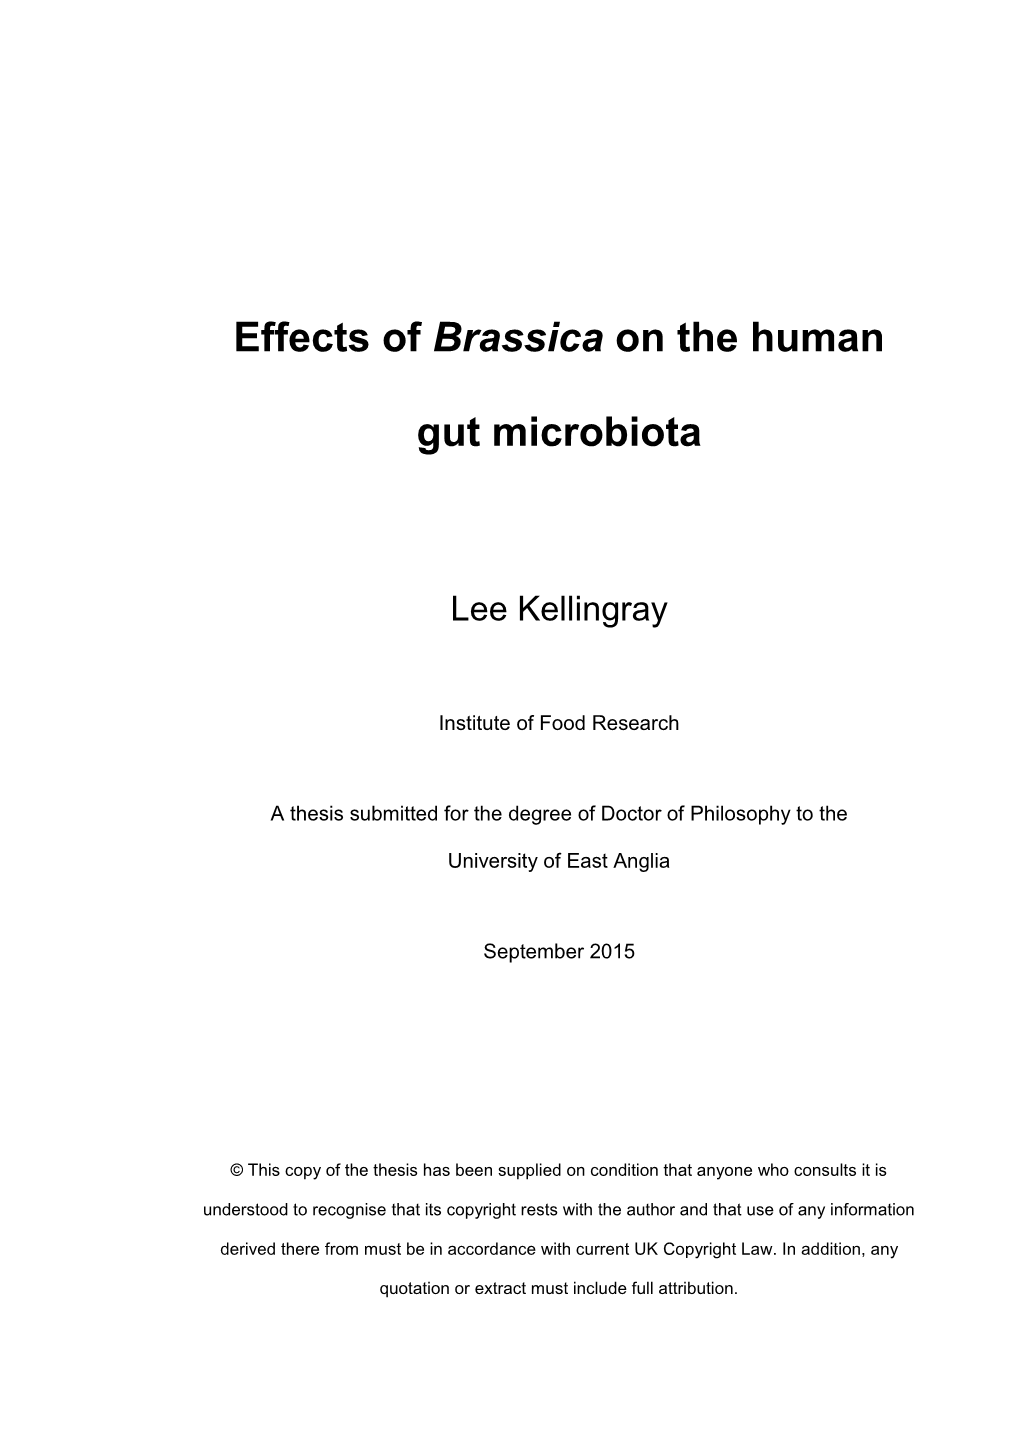 Effects of Brassica on the Human Gut Microbiota